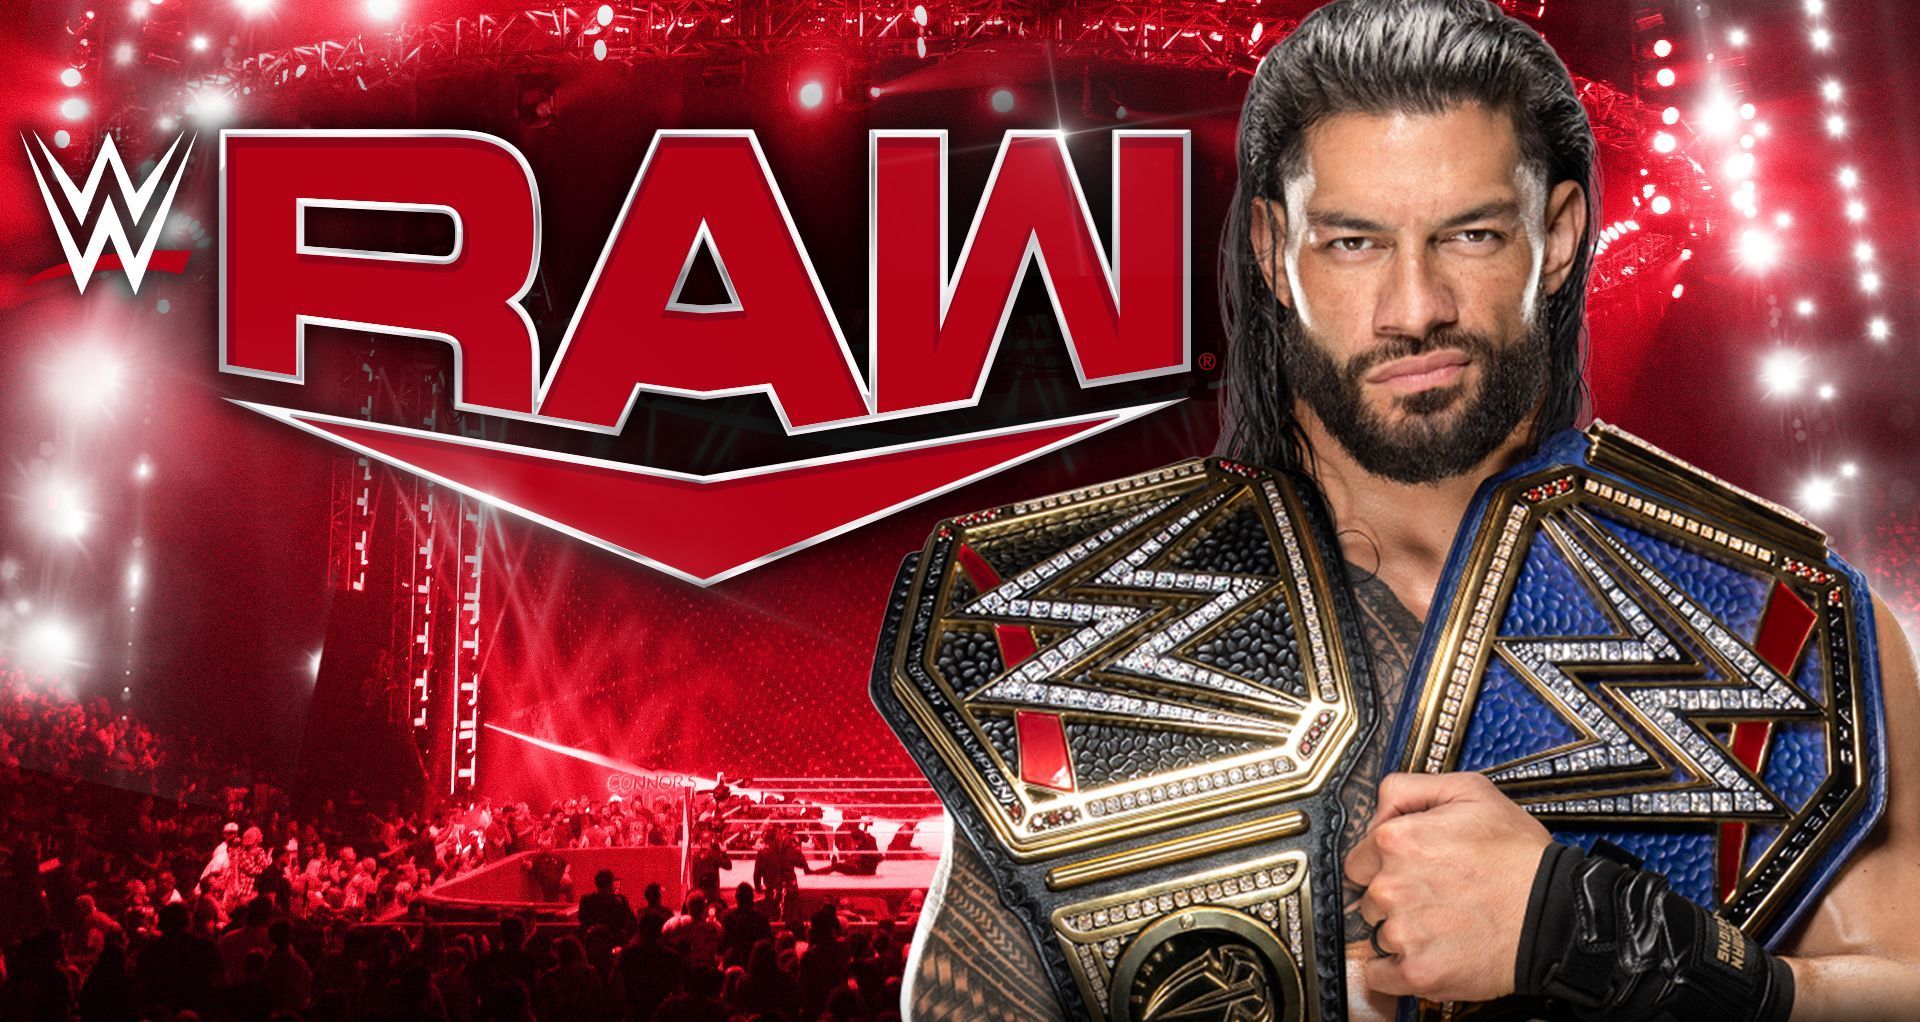 Reigns rarely appears on RAW